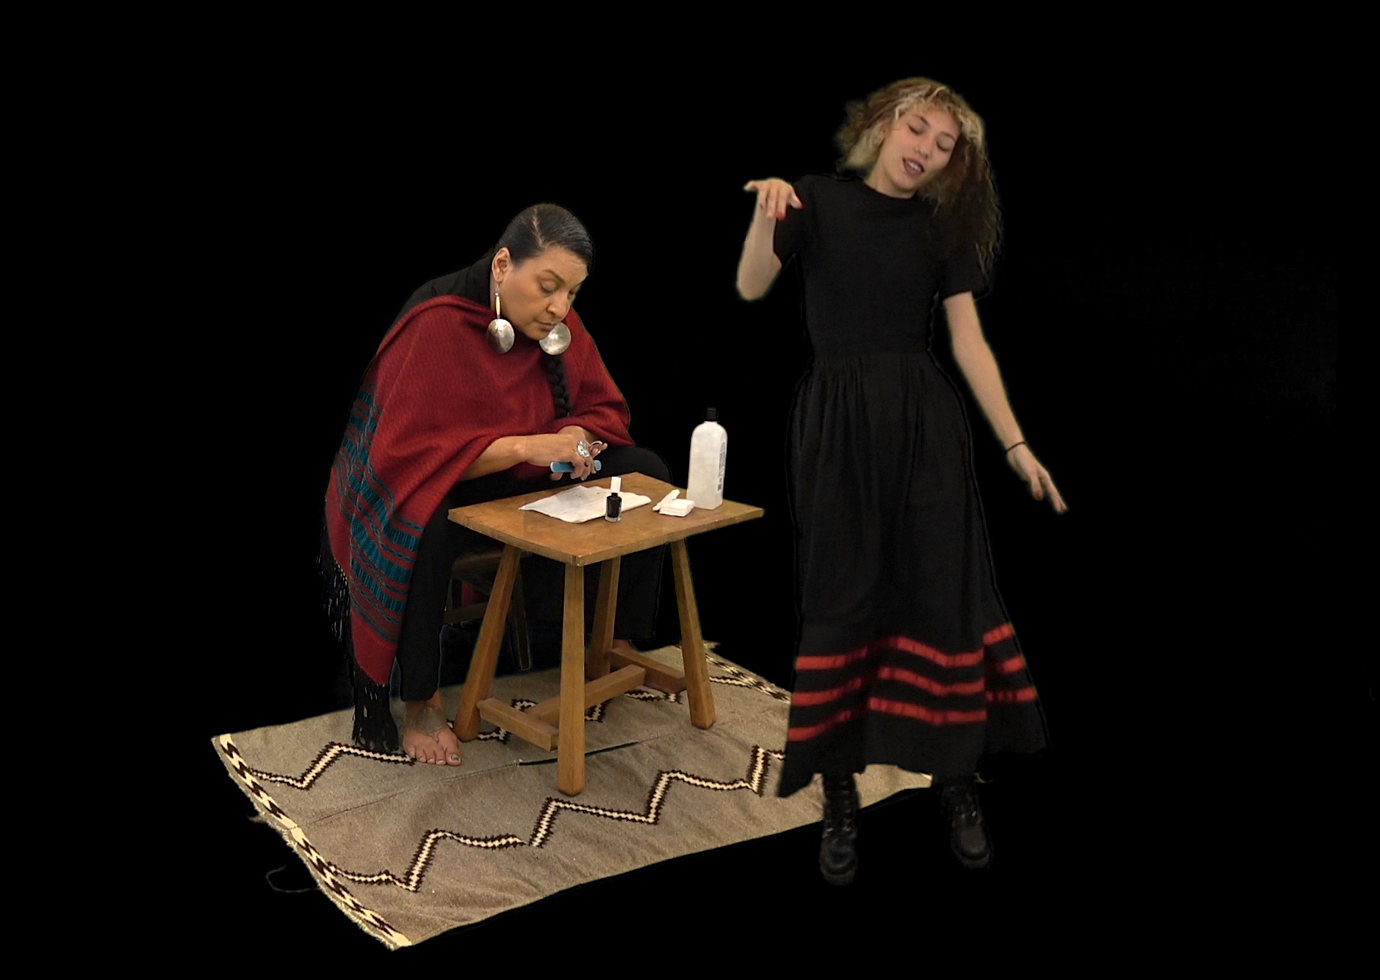 An image with a black background shows one person sitting at a small table and rug drawing. They are dressed in a red blanket with large earrings. A person in a black dress with red stripes at the bottom is dancing in front of the person sitting down.